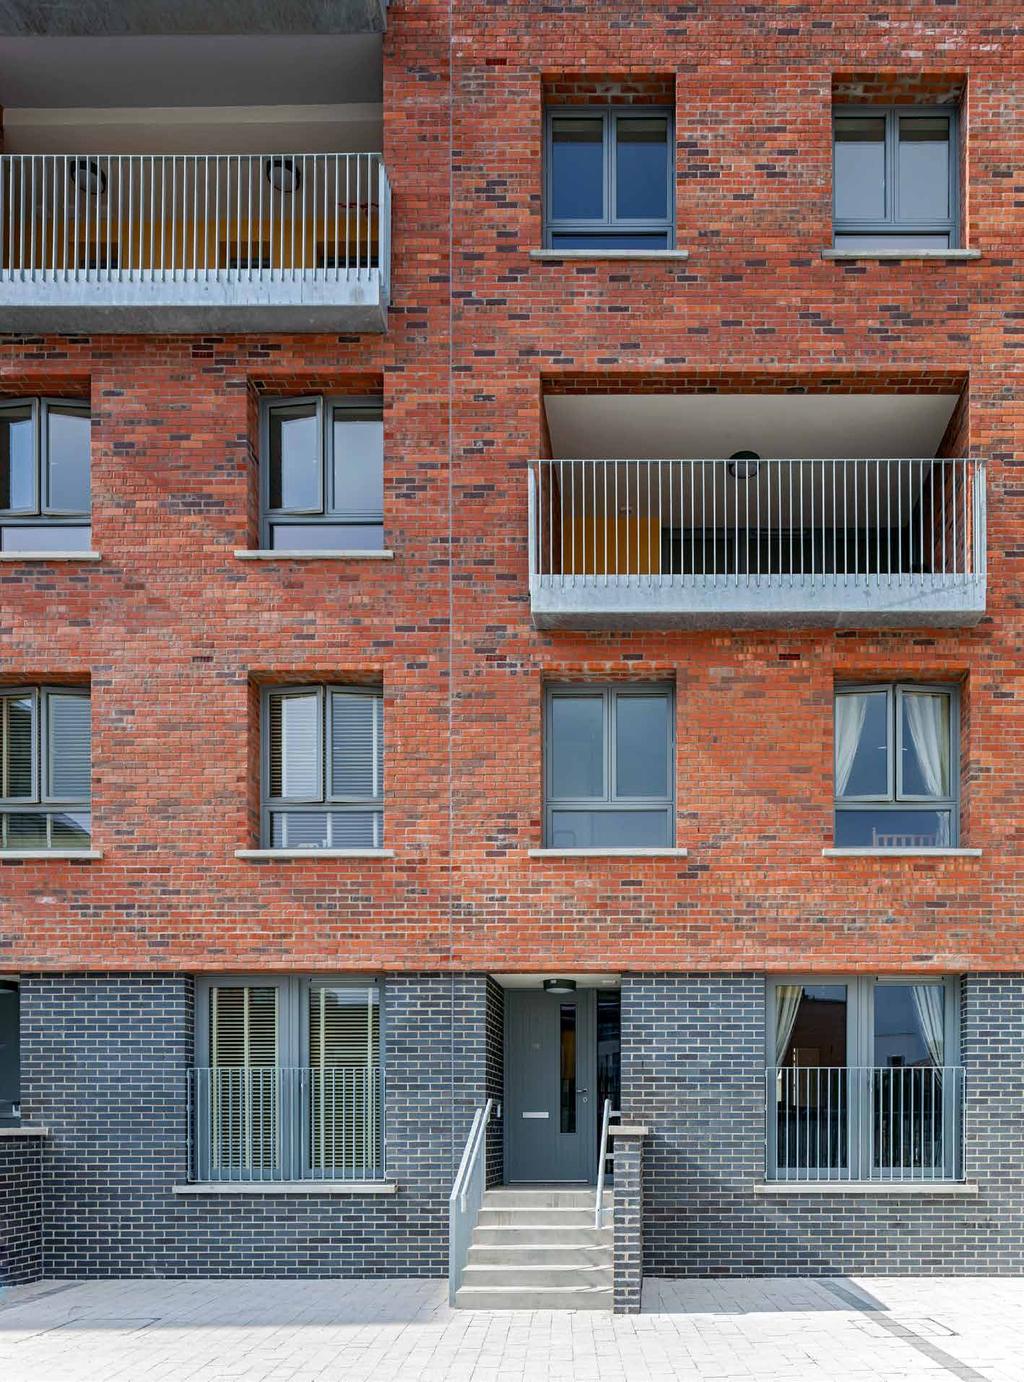 150 151 Award: Highly Commended 2015 RIAI Irish Architecture Awards Client: Dublin City Council Liberty House takes